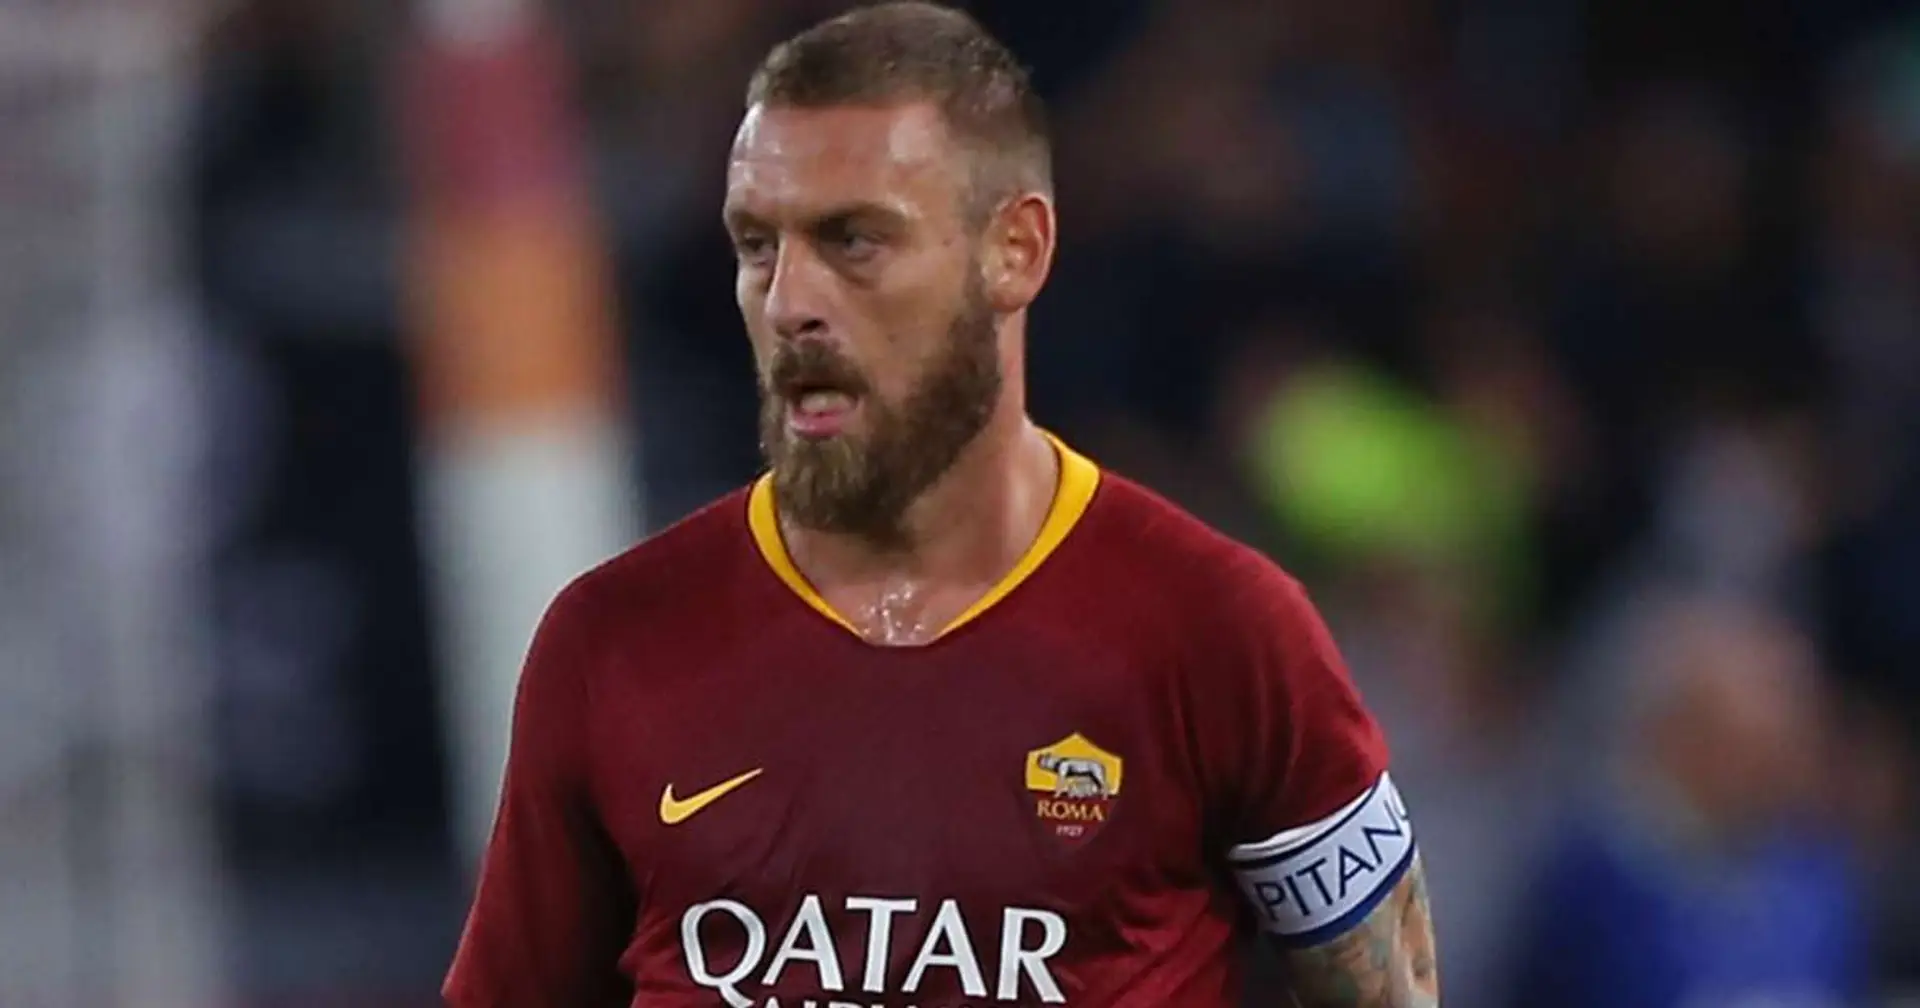 'He is my absolute hero': Italy legend De Rossi would take pic with only one footballer – Roy Keane